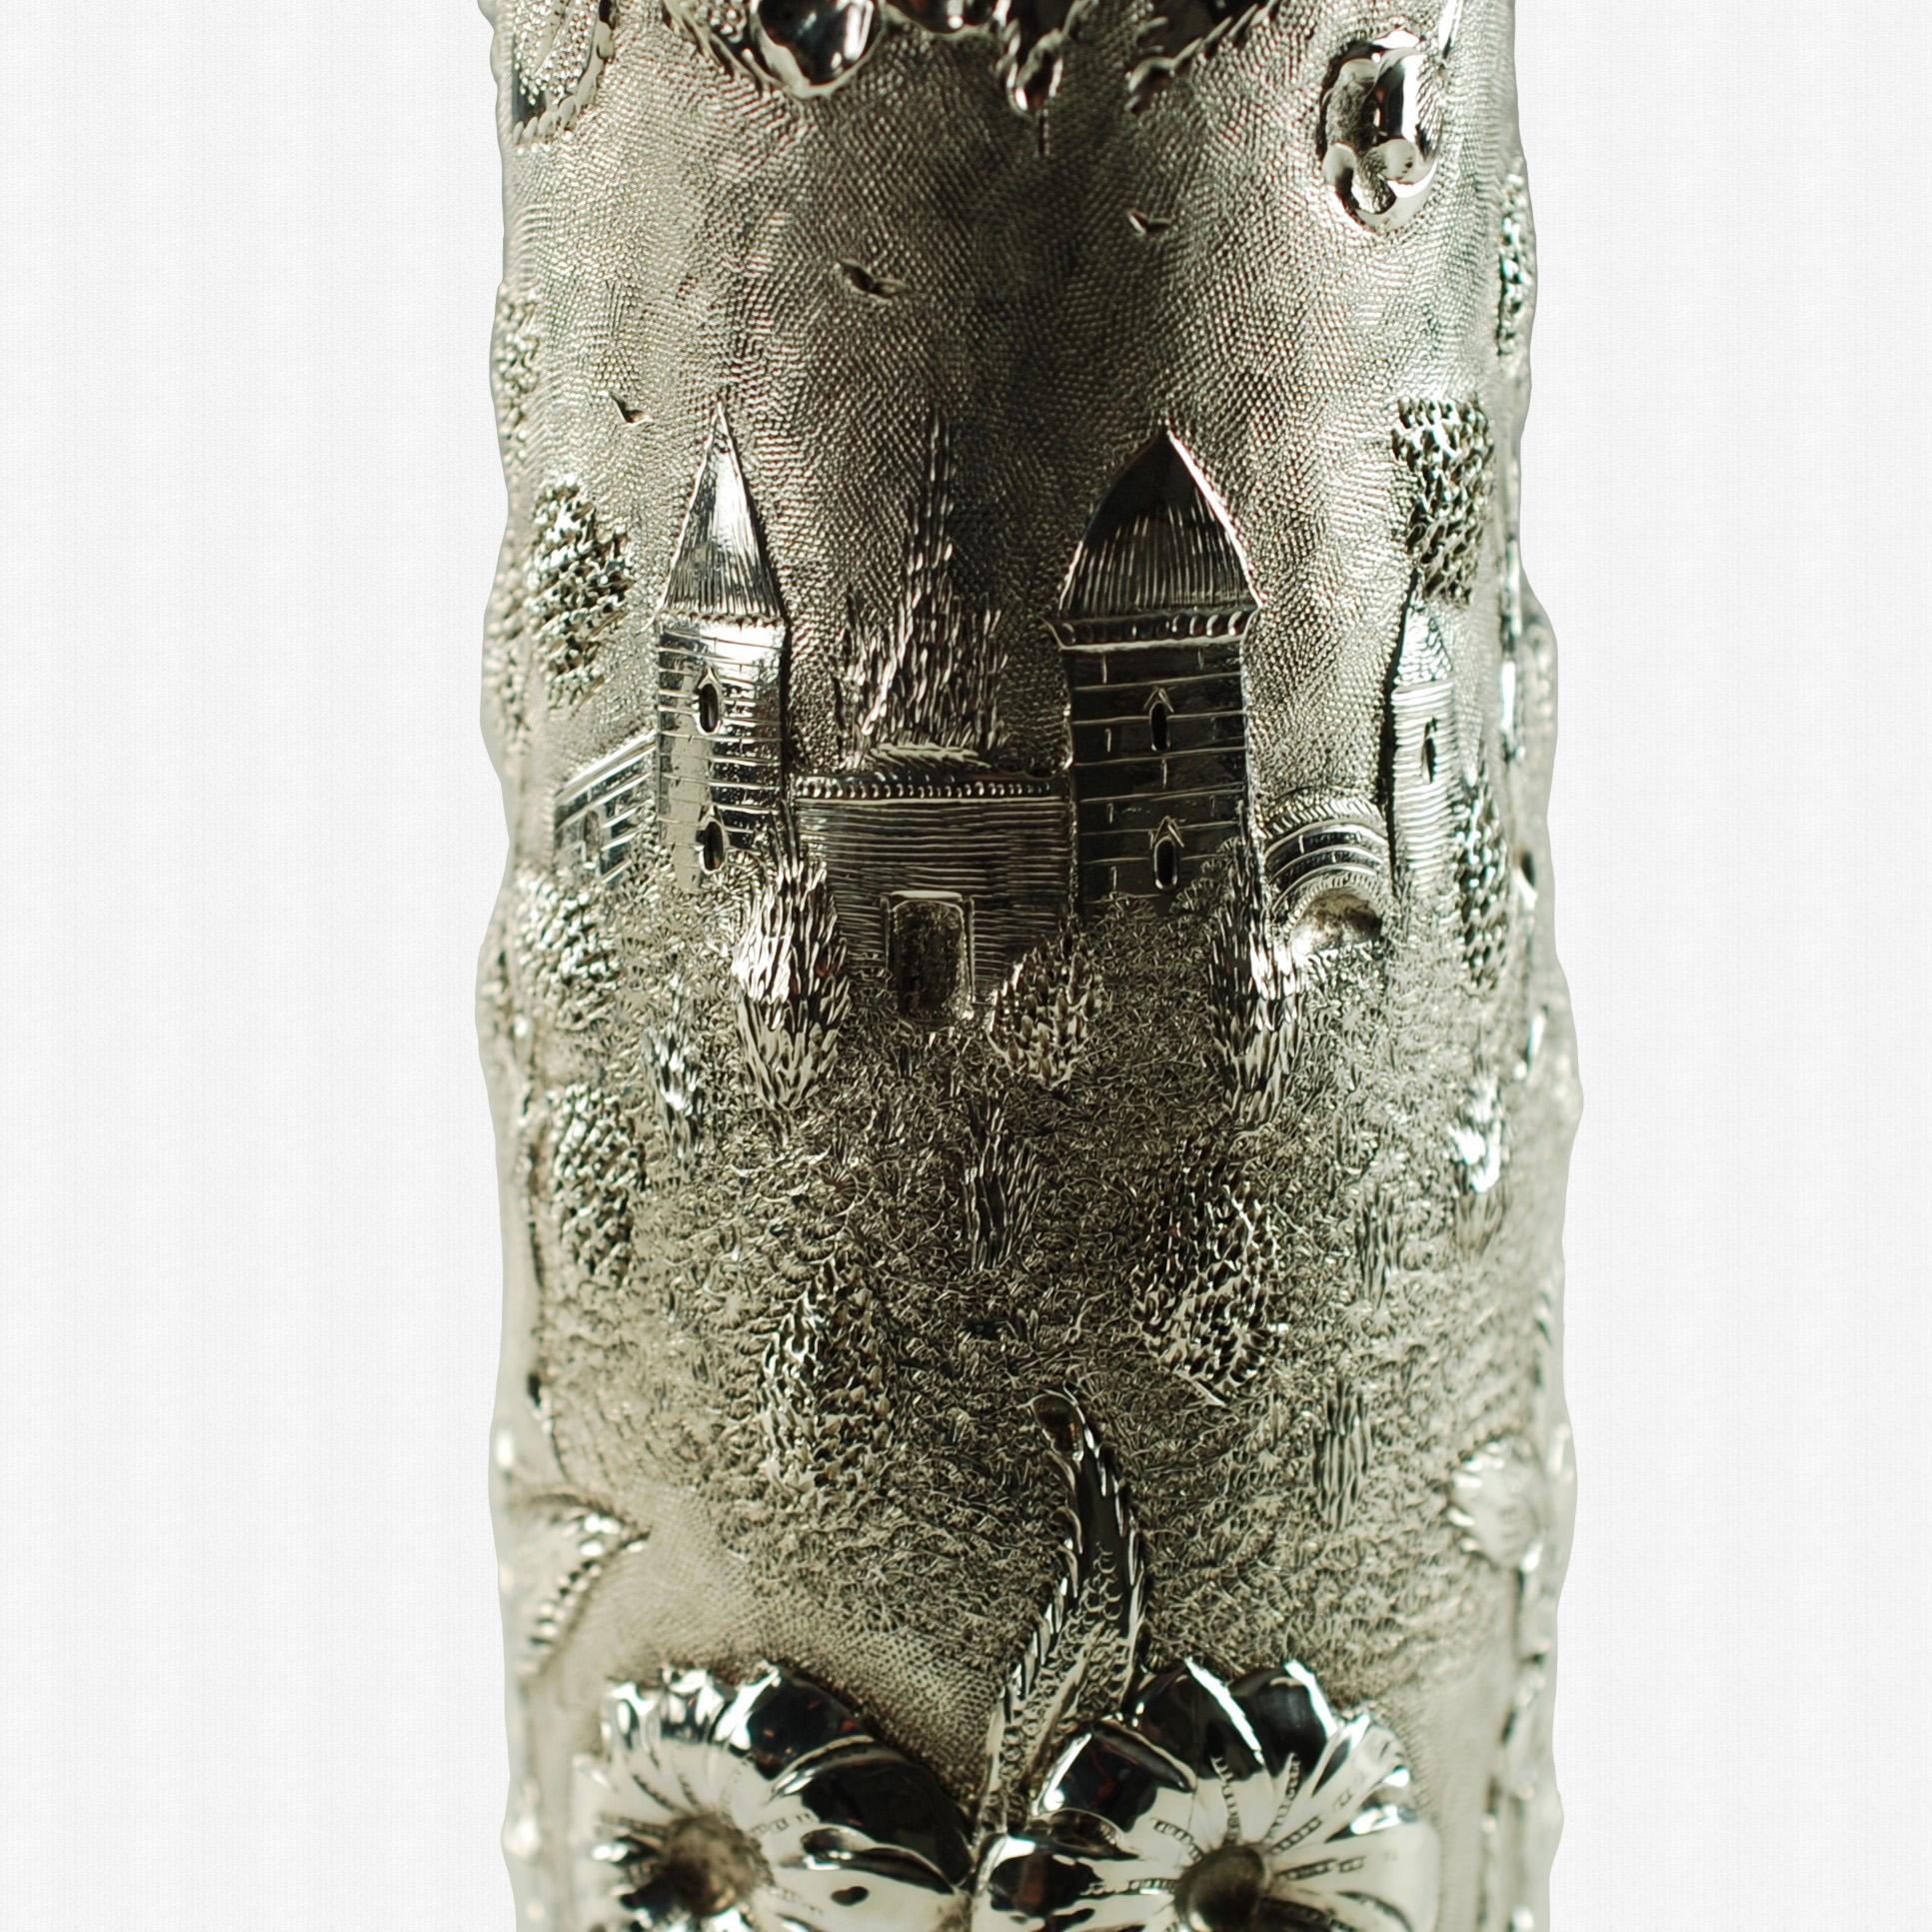 Repoussé Early 20th Century Loring Andrews Sterling Silver Repousse Castle Pattern Vase